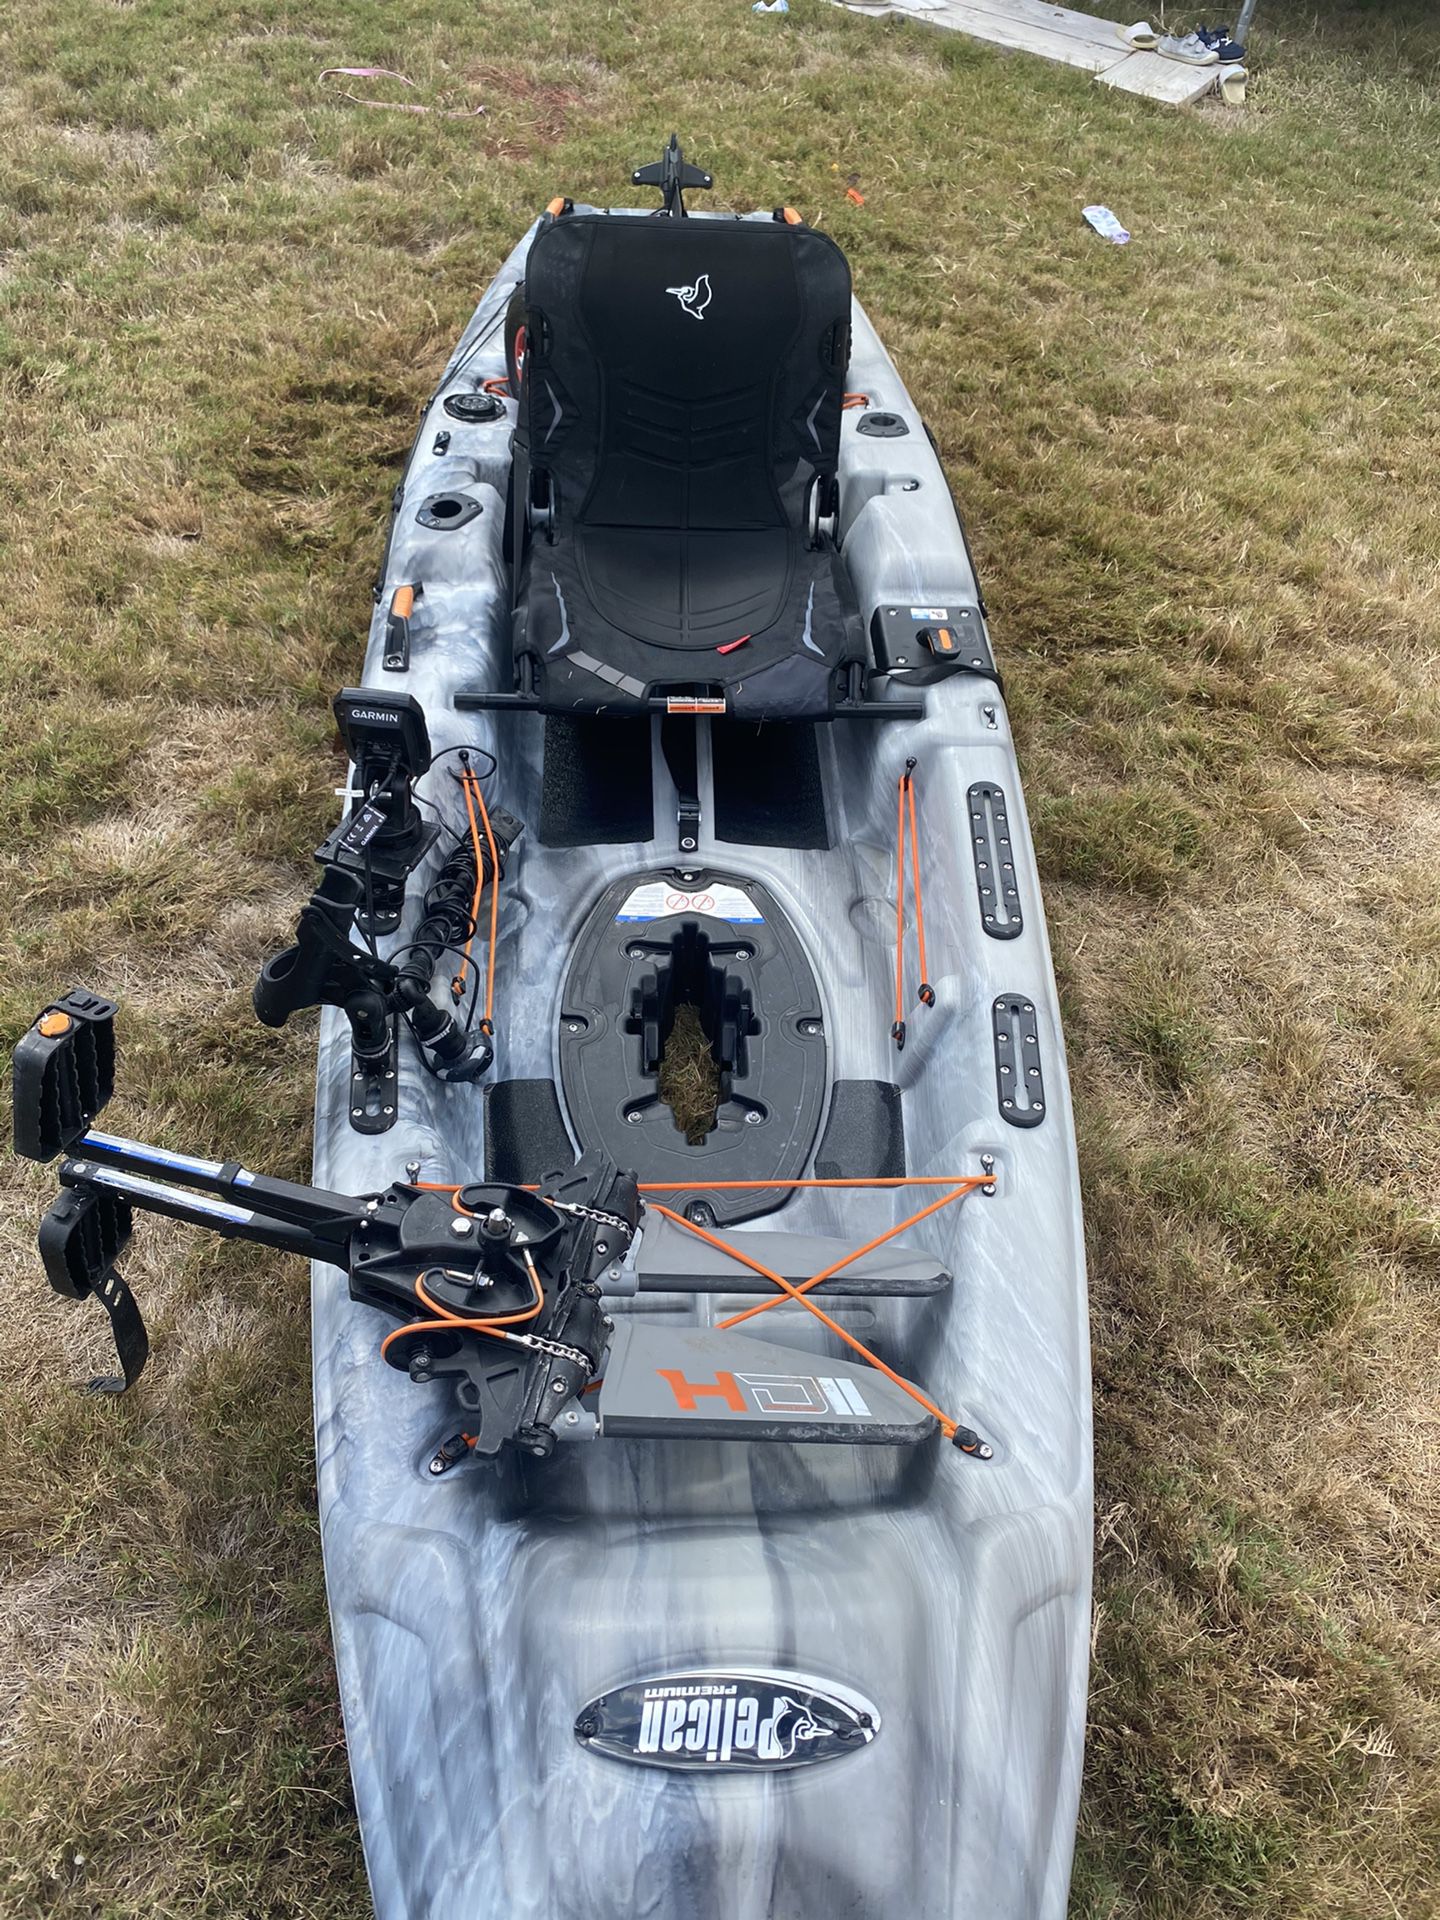 Kayak. Pelican The Catch 110 HyDryve II 10 ft 6 in Pedal Drive Fishing Kayak